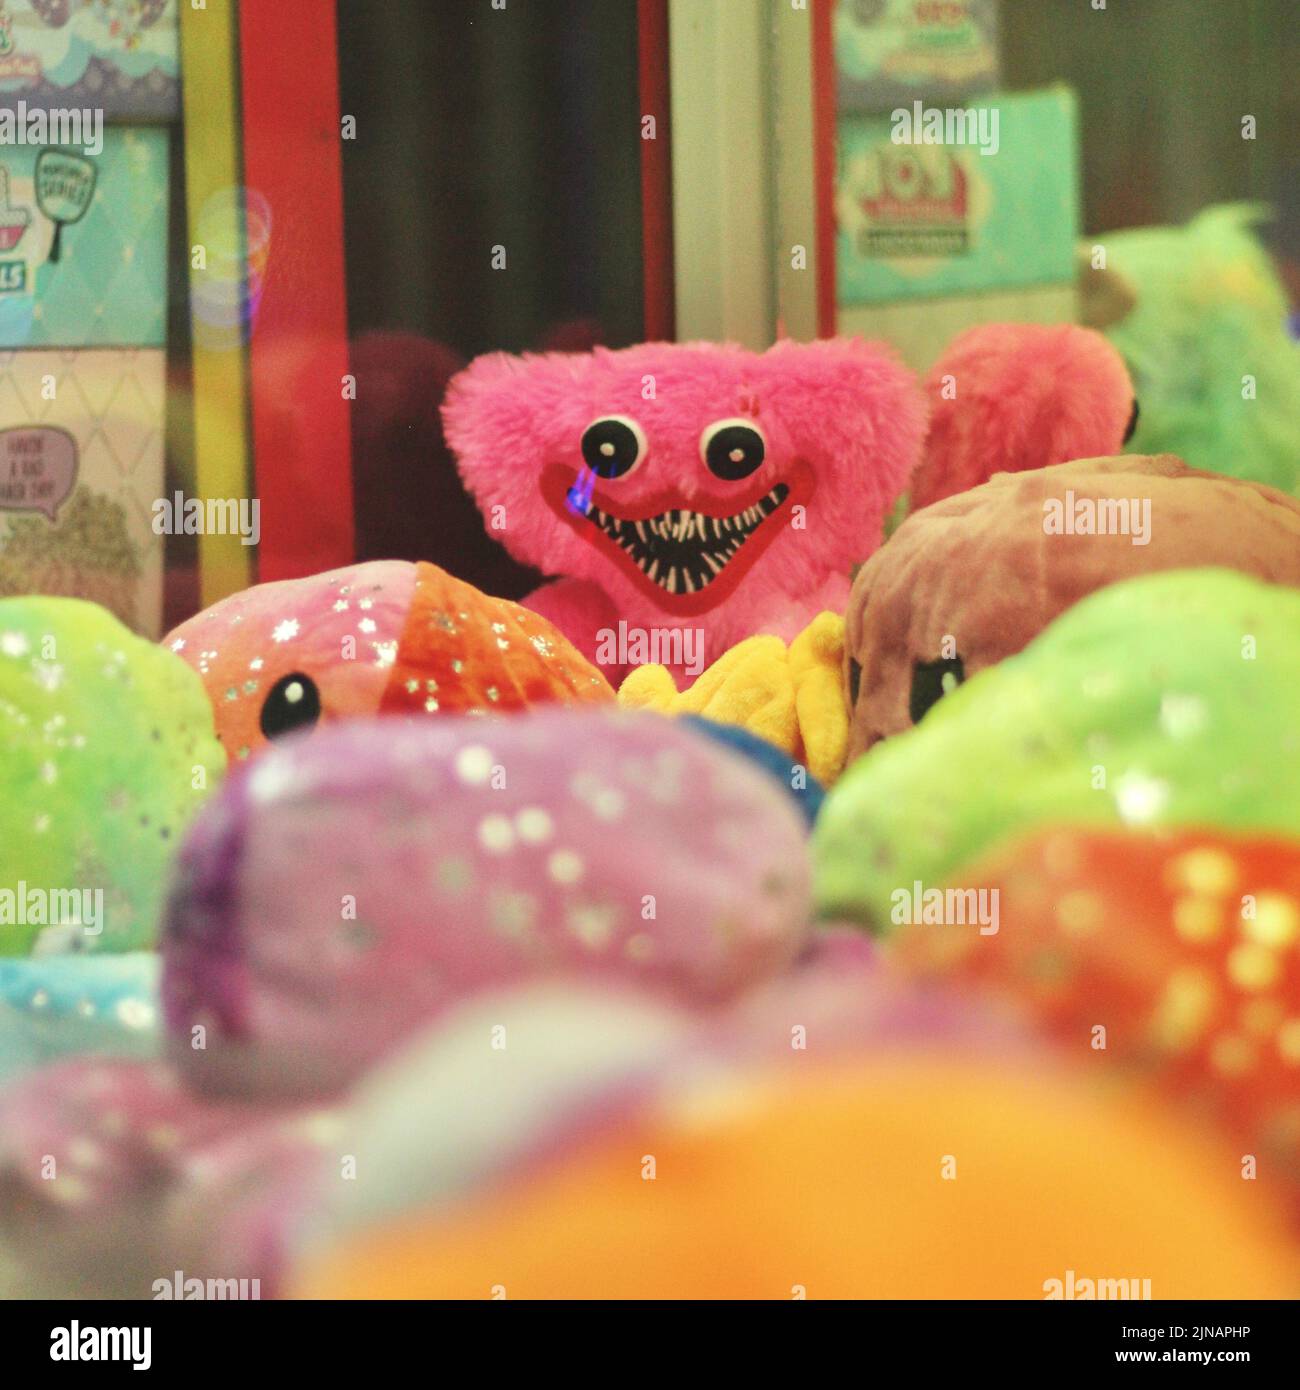 Colorful toy mass with a disturbing but pretty pink plush toy  looking at the camera. Stock Photo